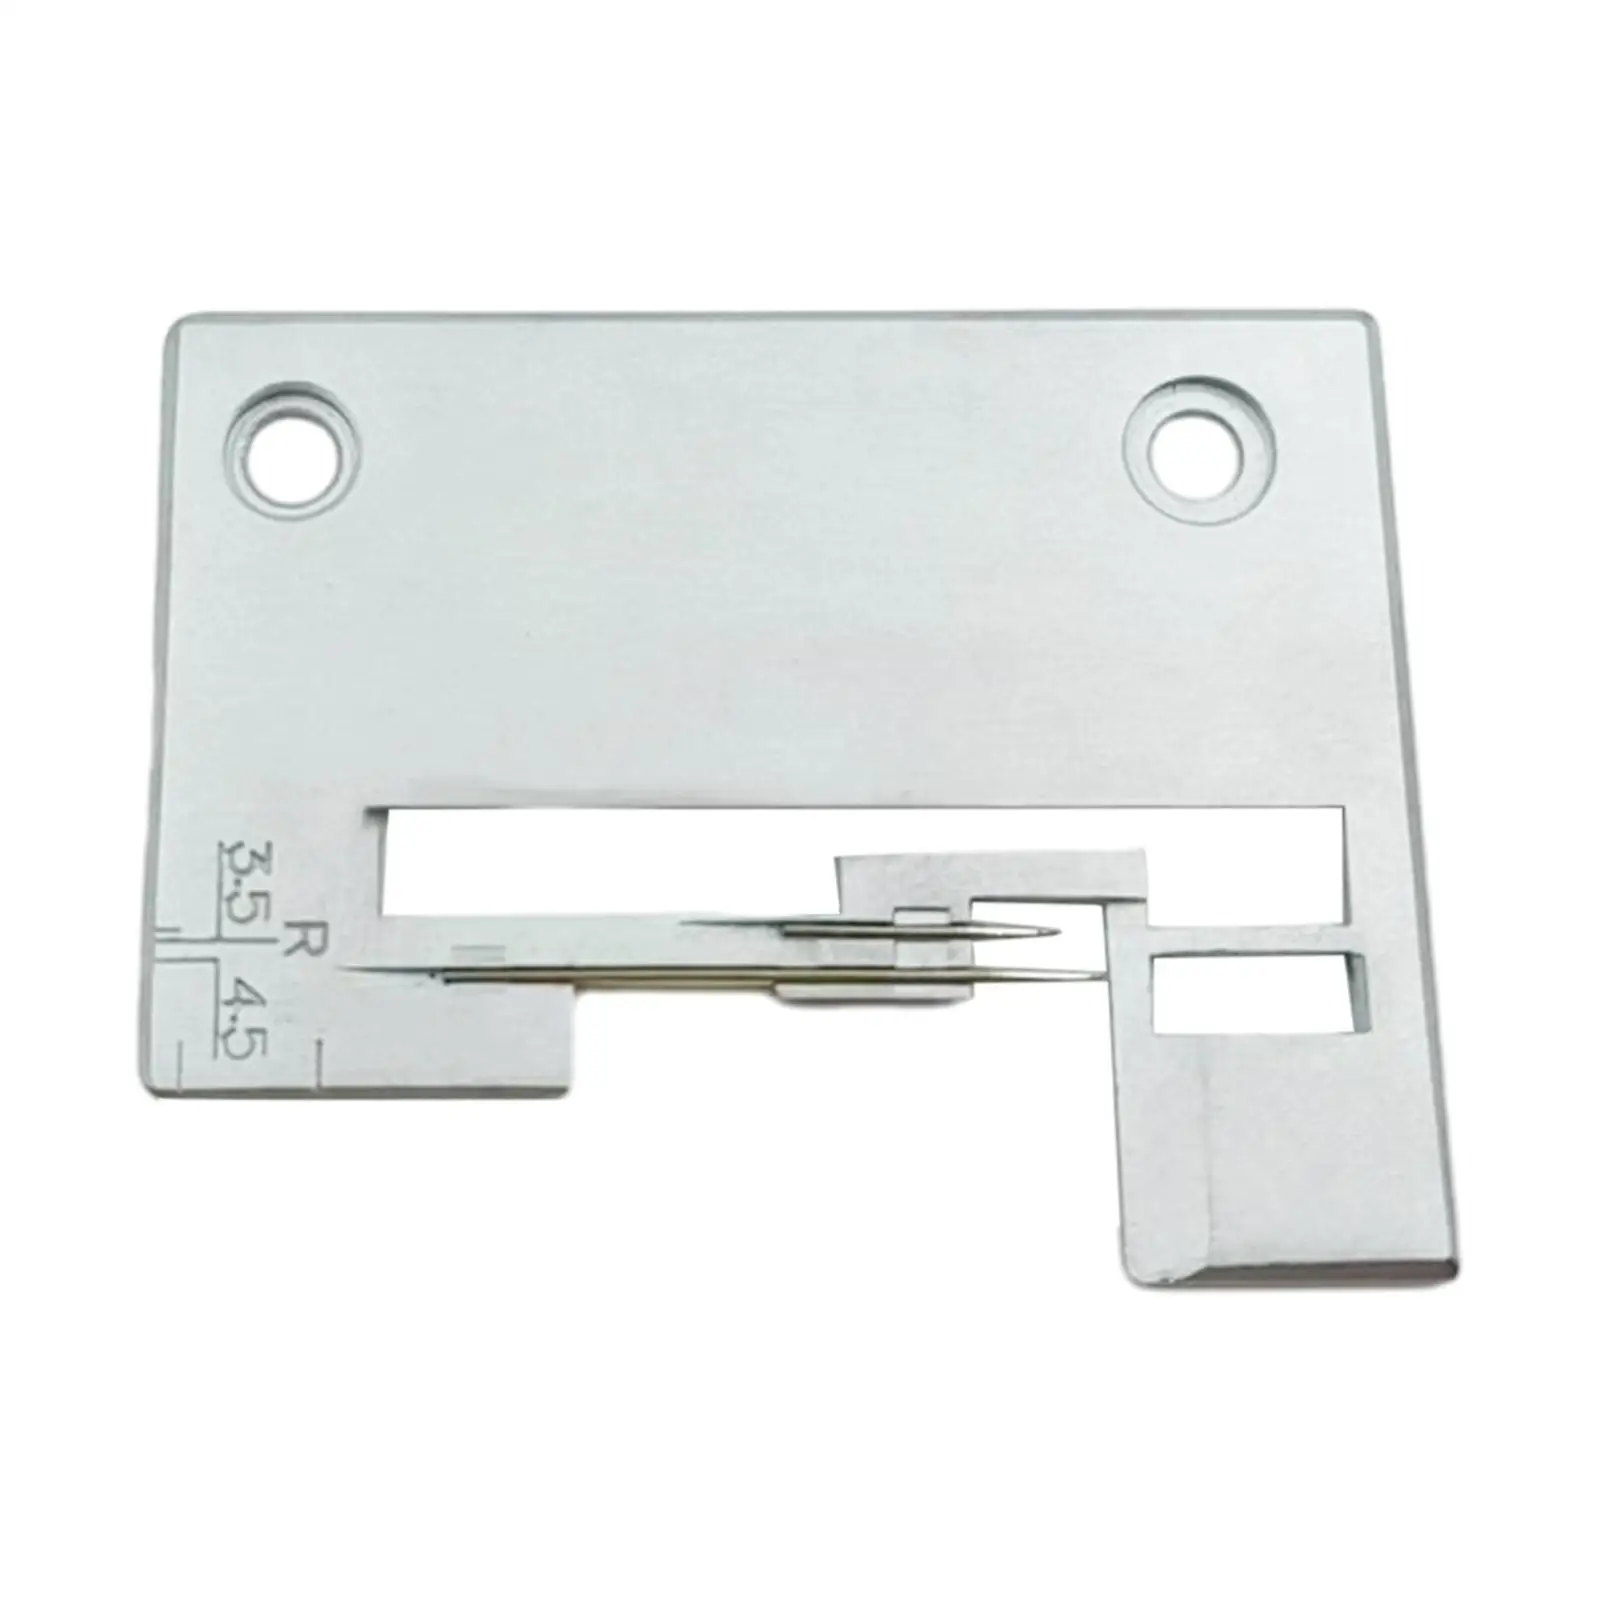 Needle Plate Replaces Industrial Heavy Duty Sturdy Accessories Iron 1x Multifunctional Tool Sewing Machines Accs Practical